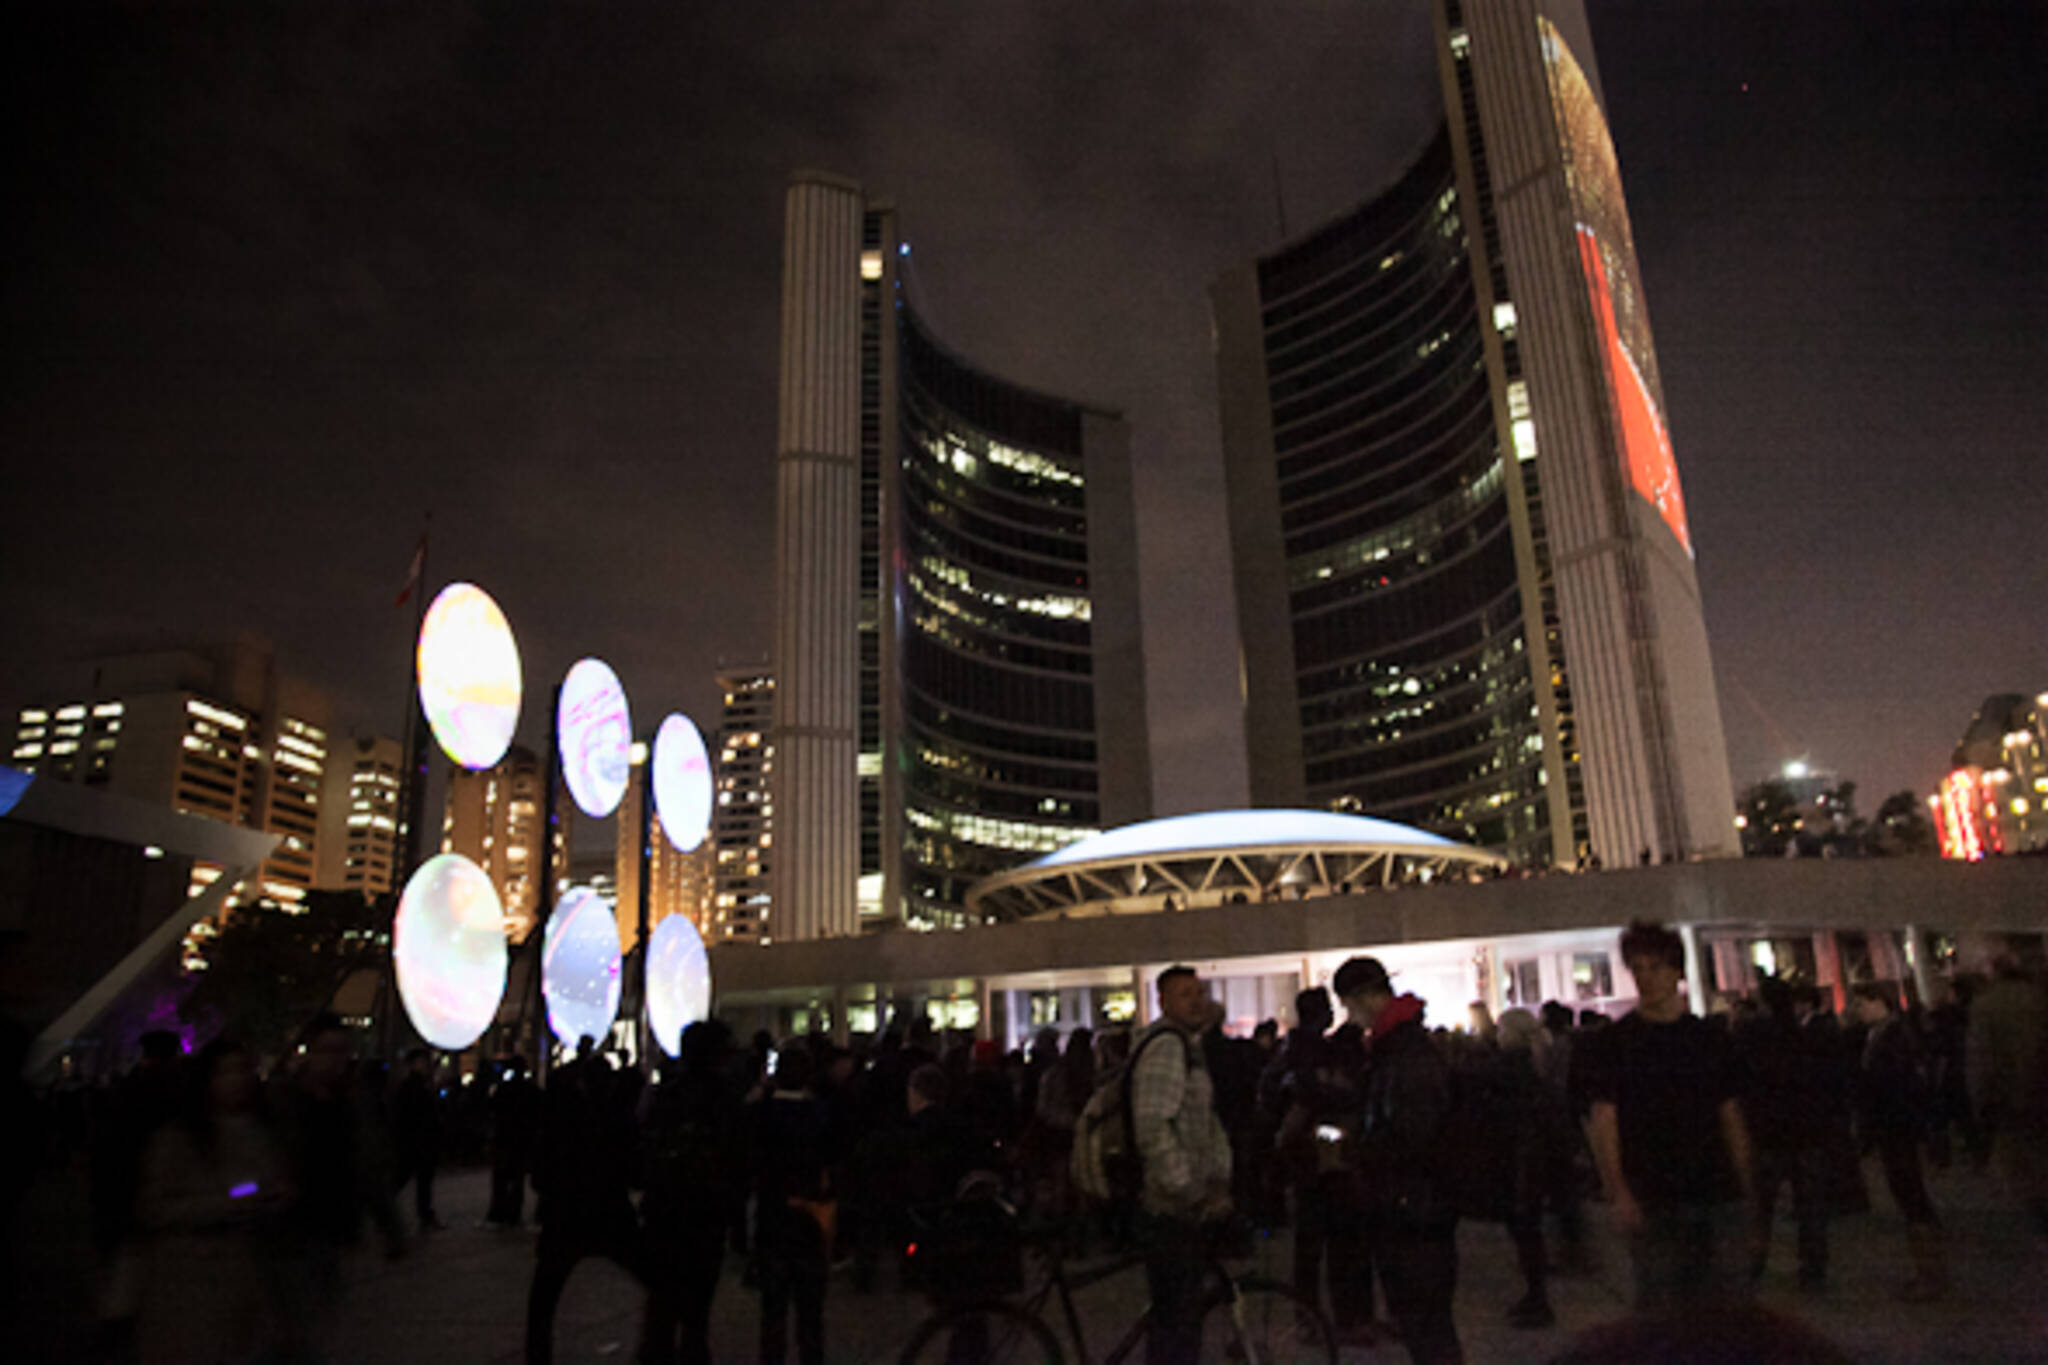 Nuit Blanche 2012 City Hall